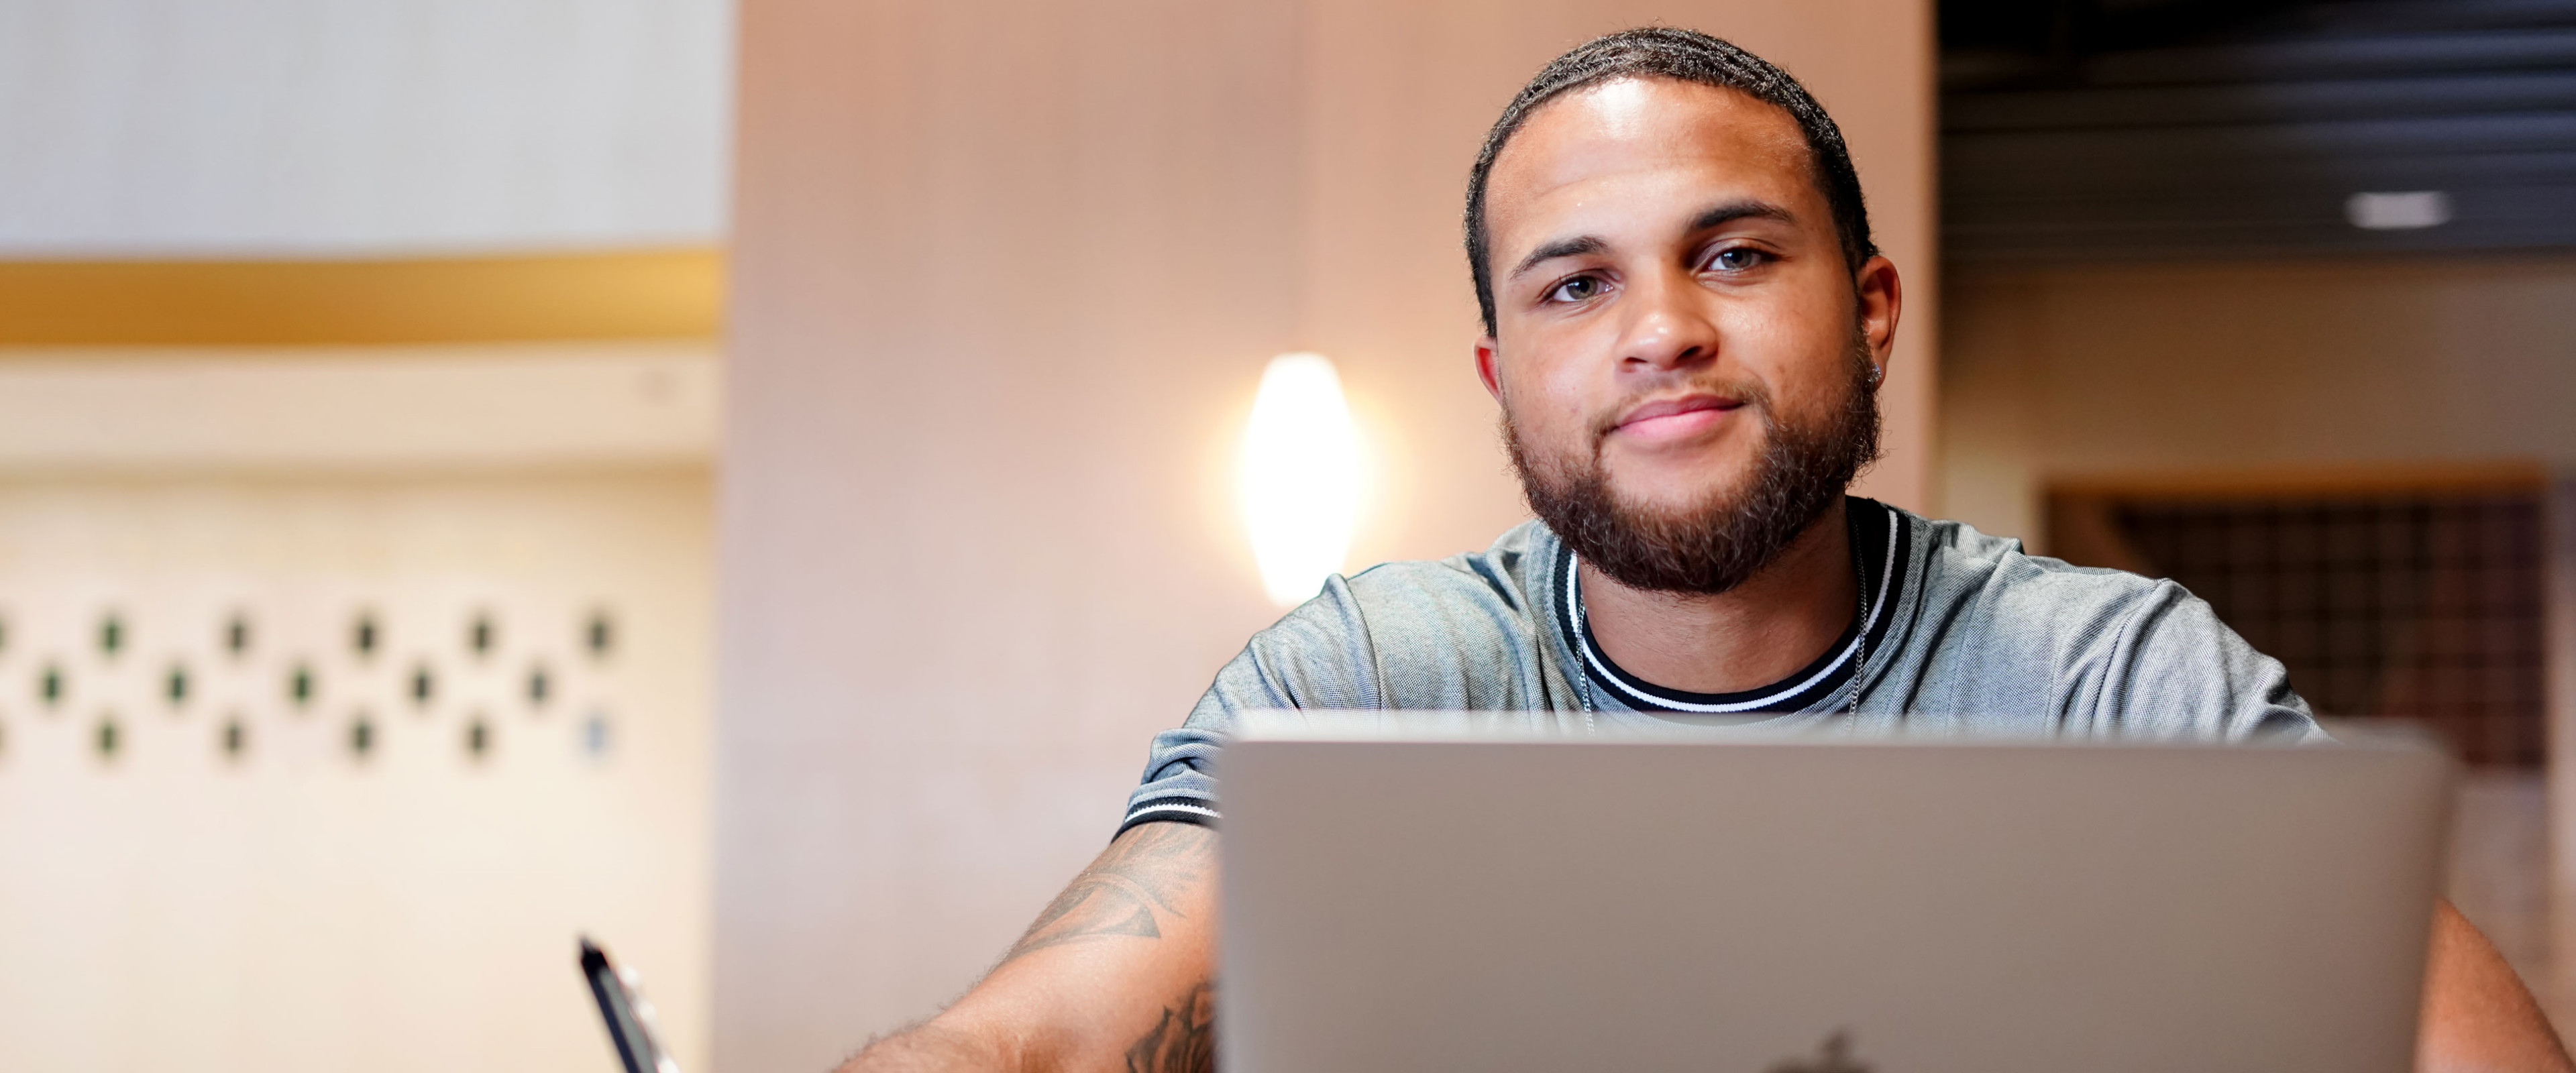 Man studying with laptop